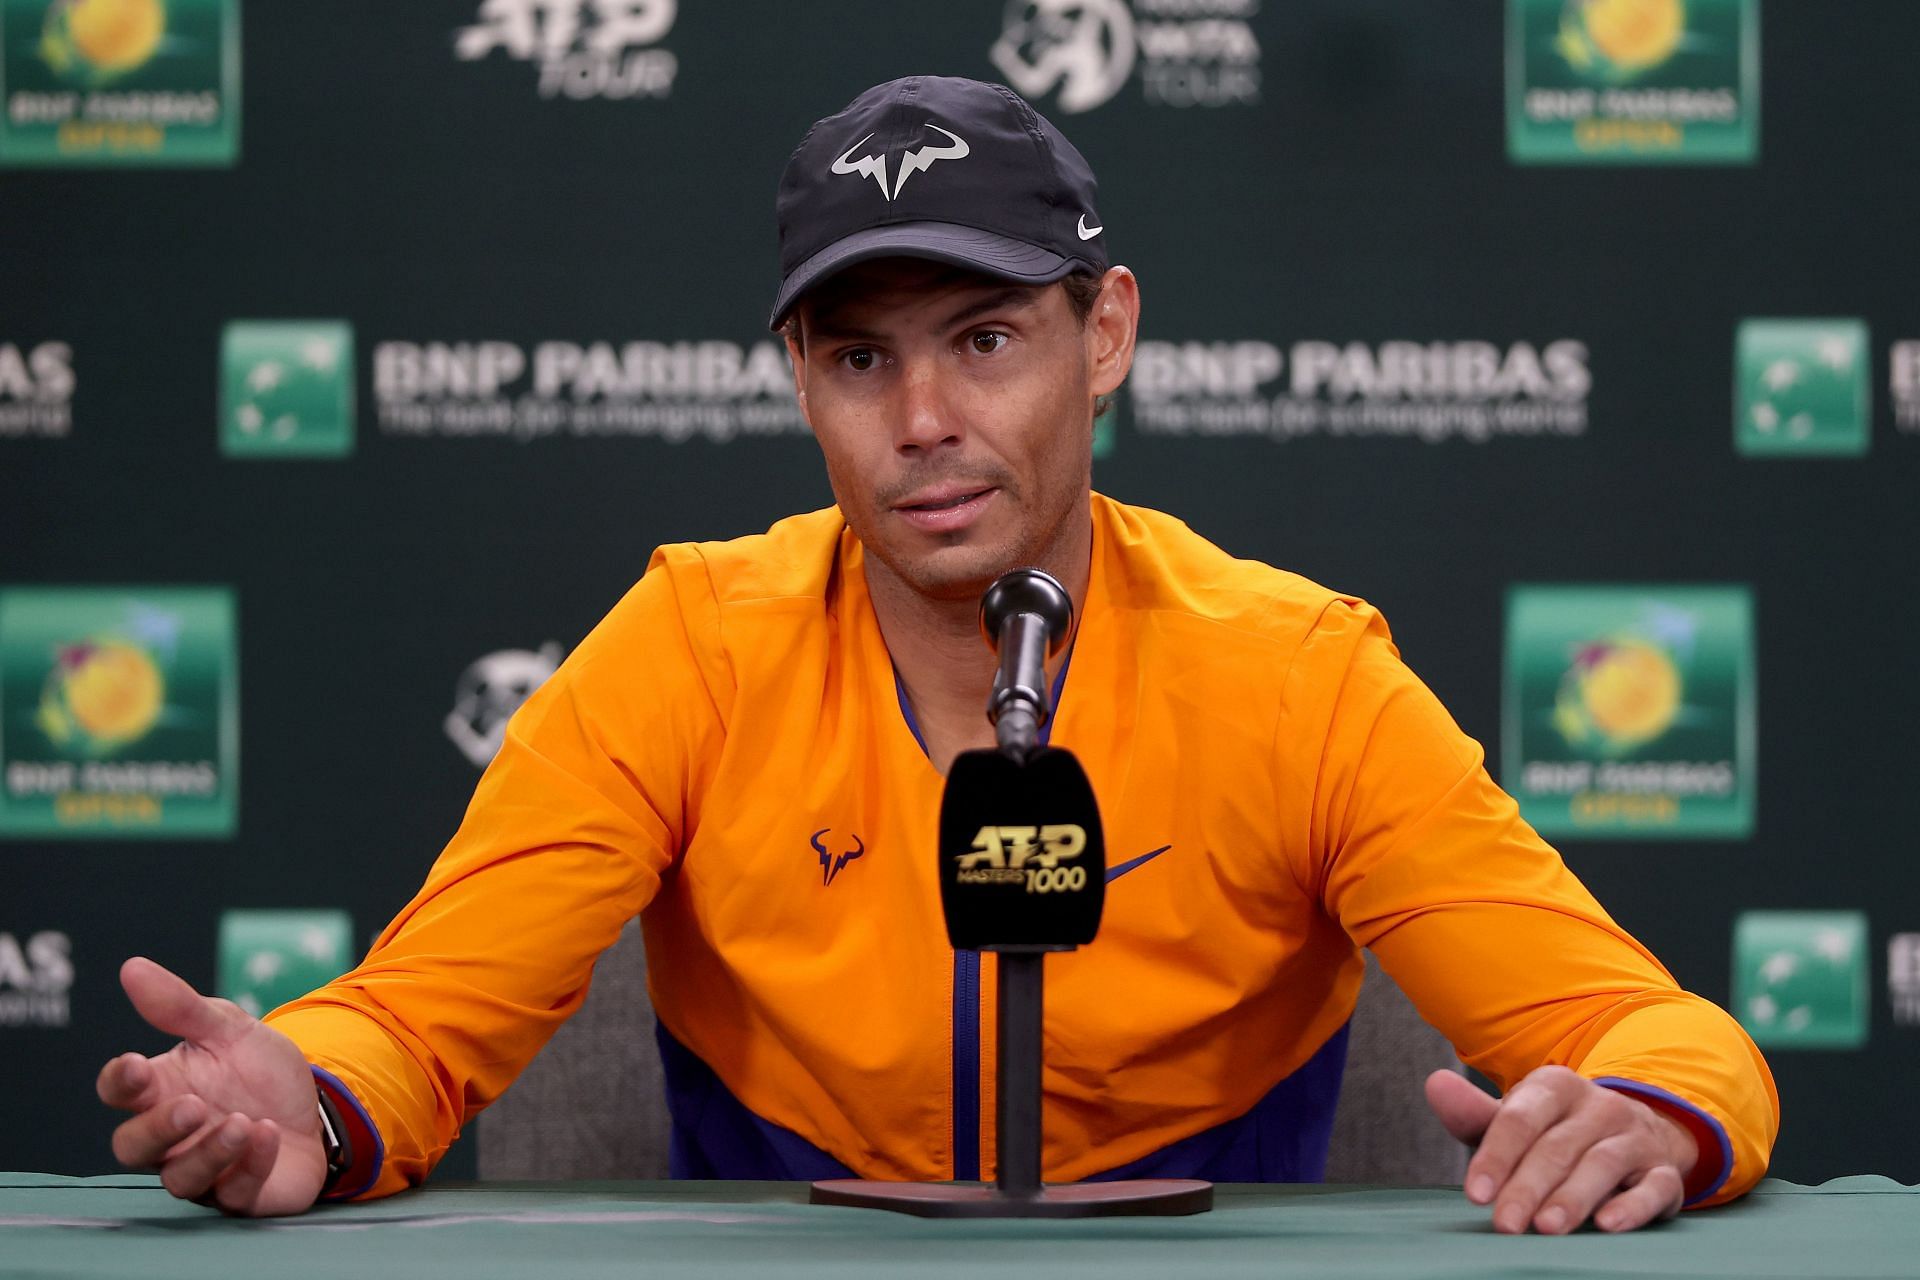 Rafael Nadal is among the favorites to win the Indian Wells Masters this year